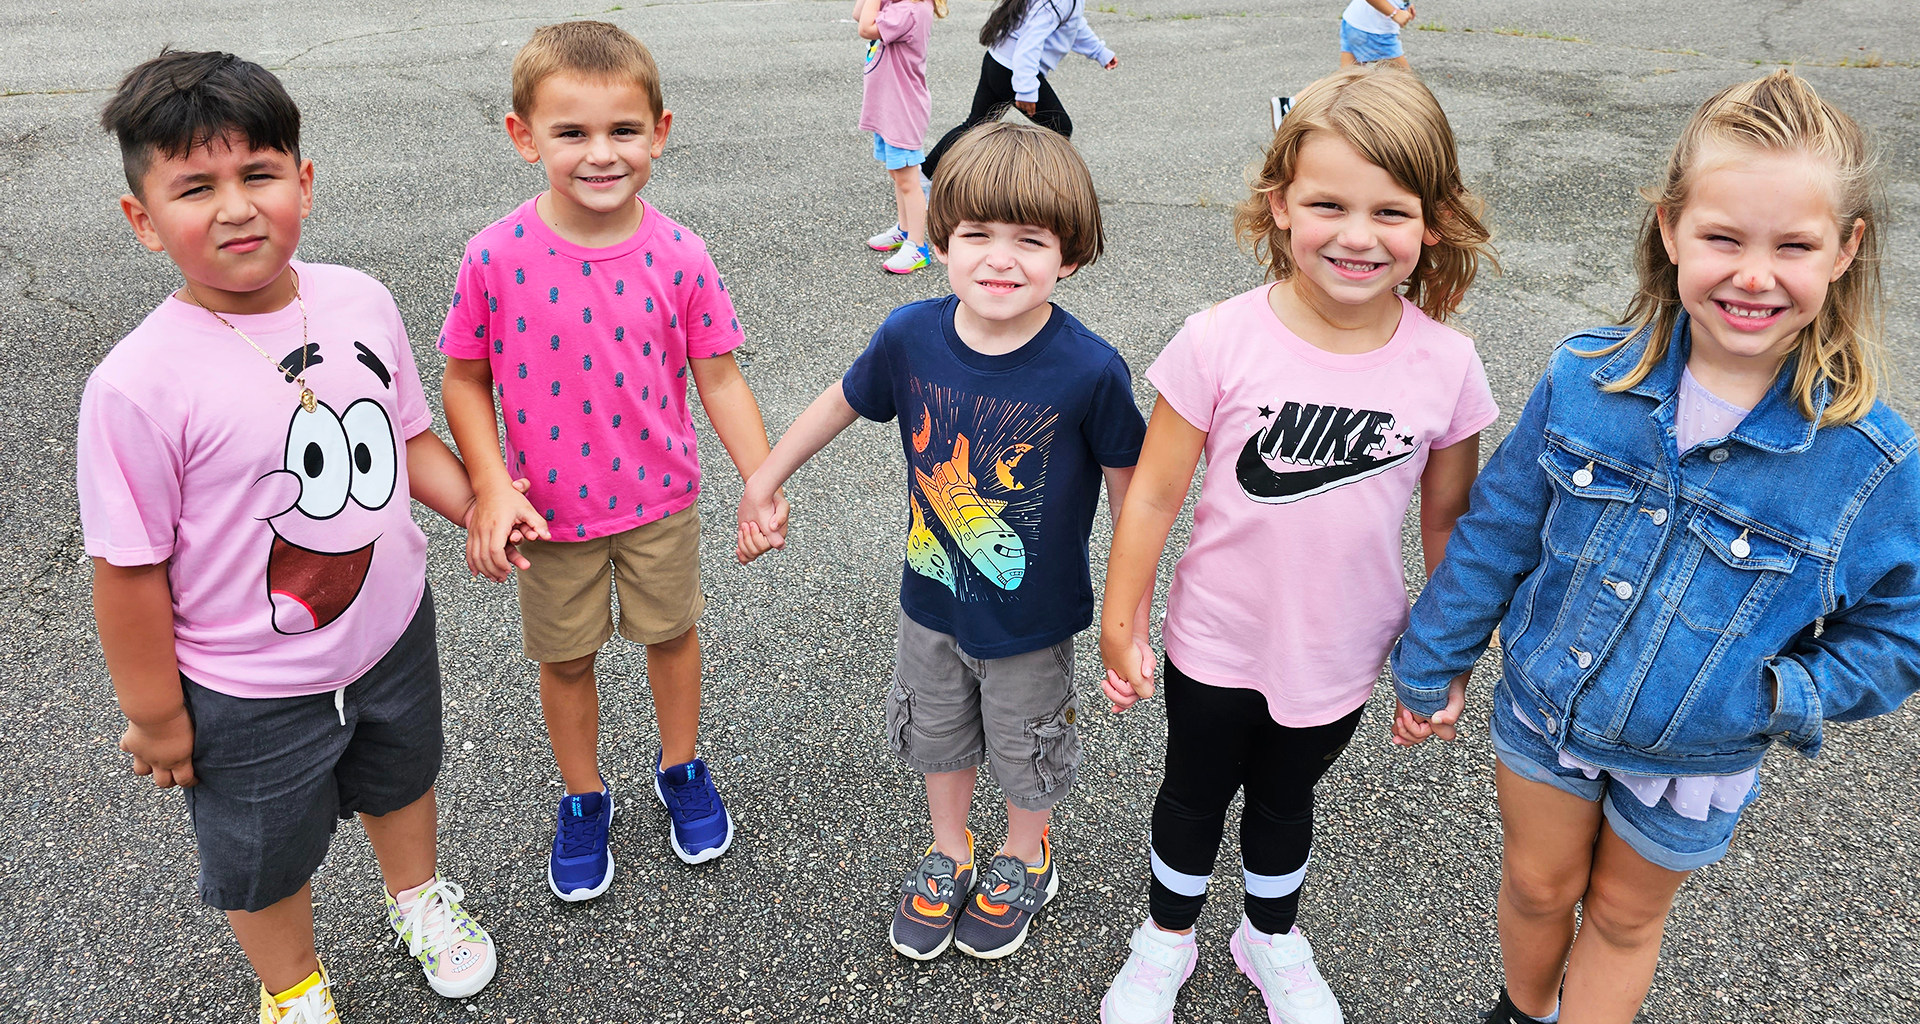 Five student s hold hands on the playground.